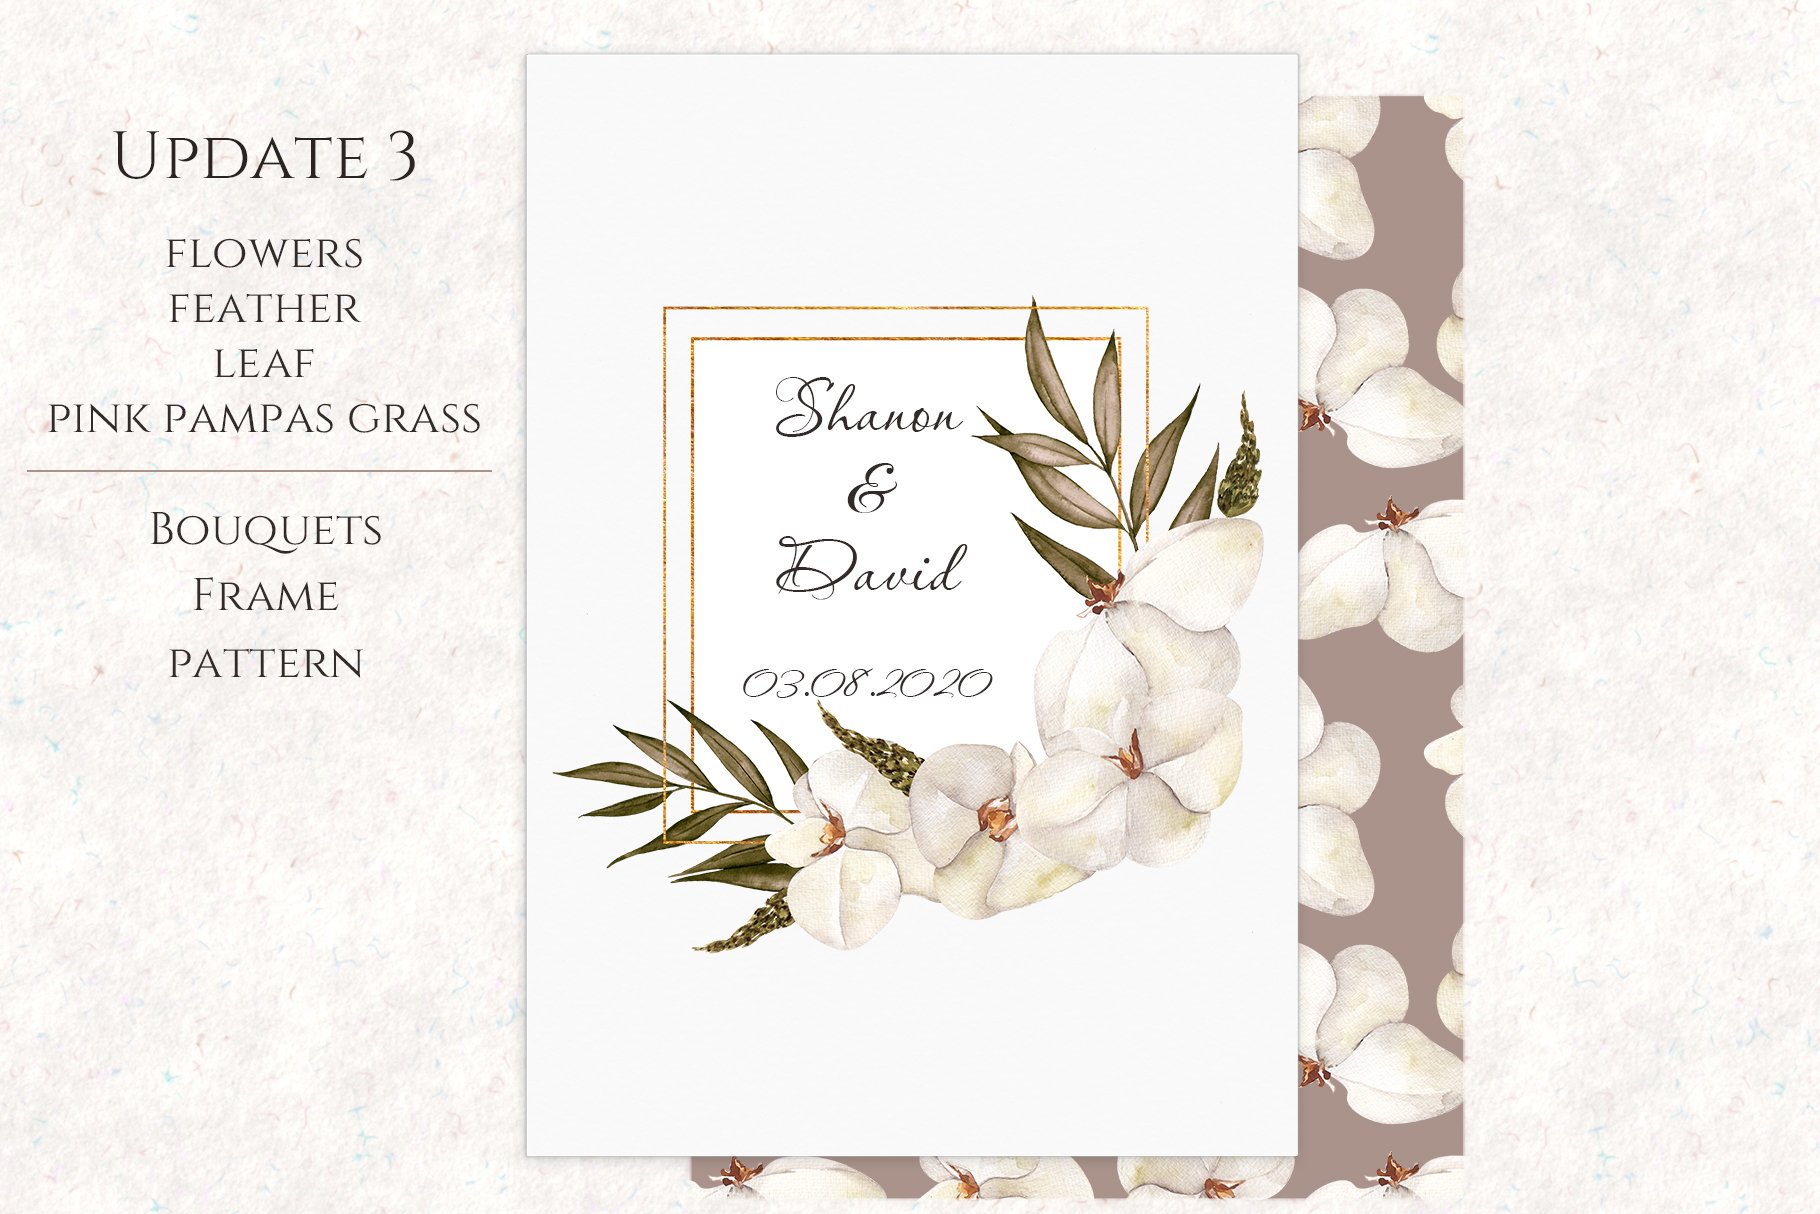 Wedding card with flowers and leaves on it.